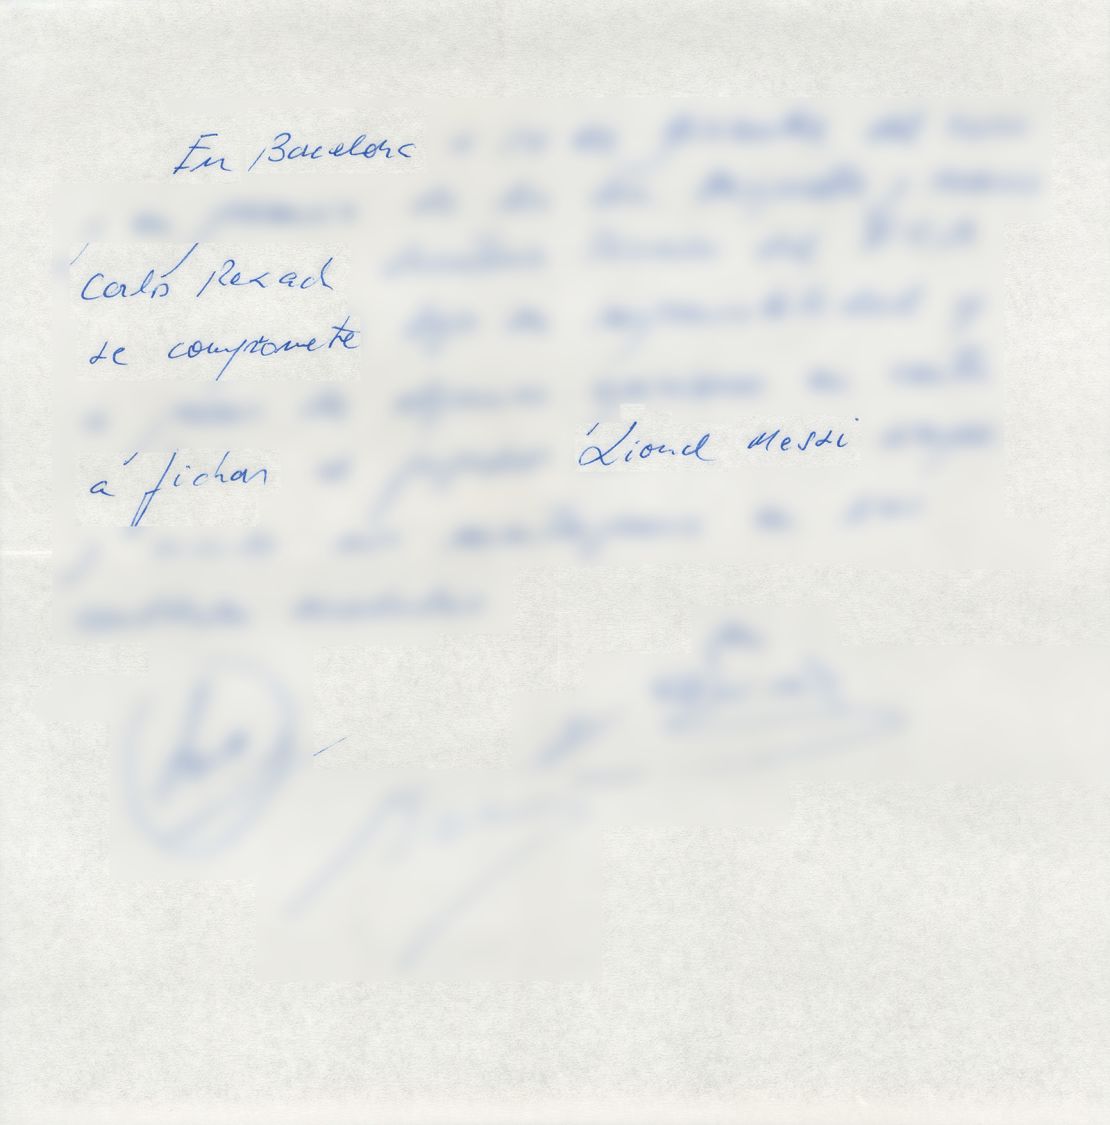 A picture of the original napkin upon which Messi's first contract with Barcelona was signed. The image was provided to CNN with blur added.